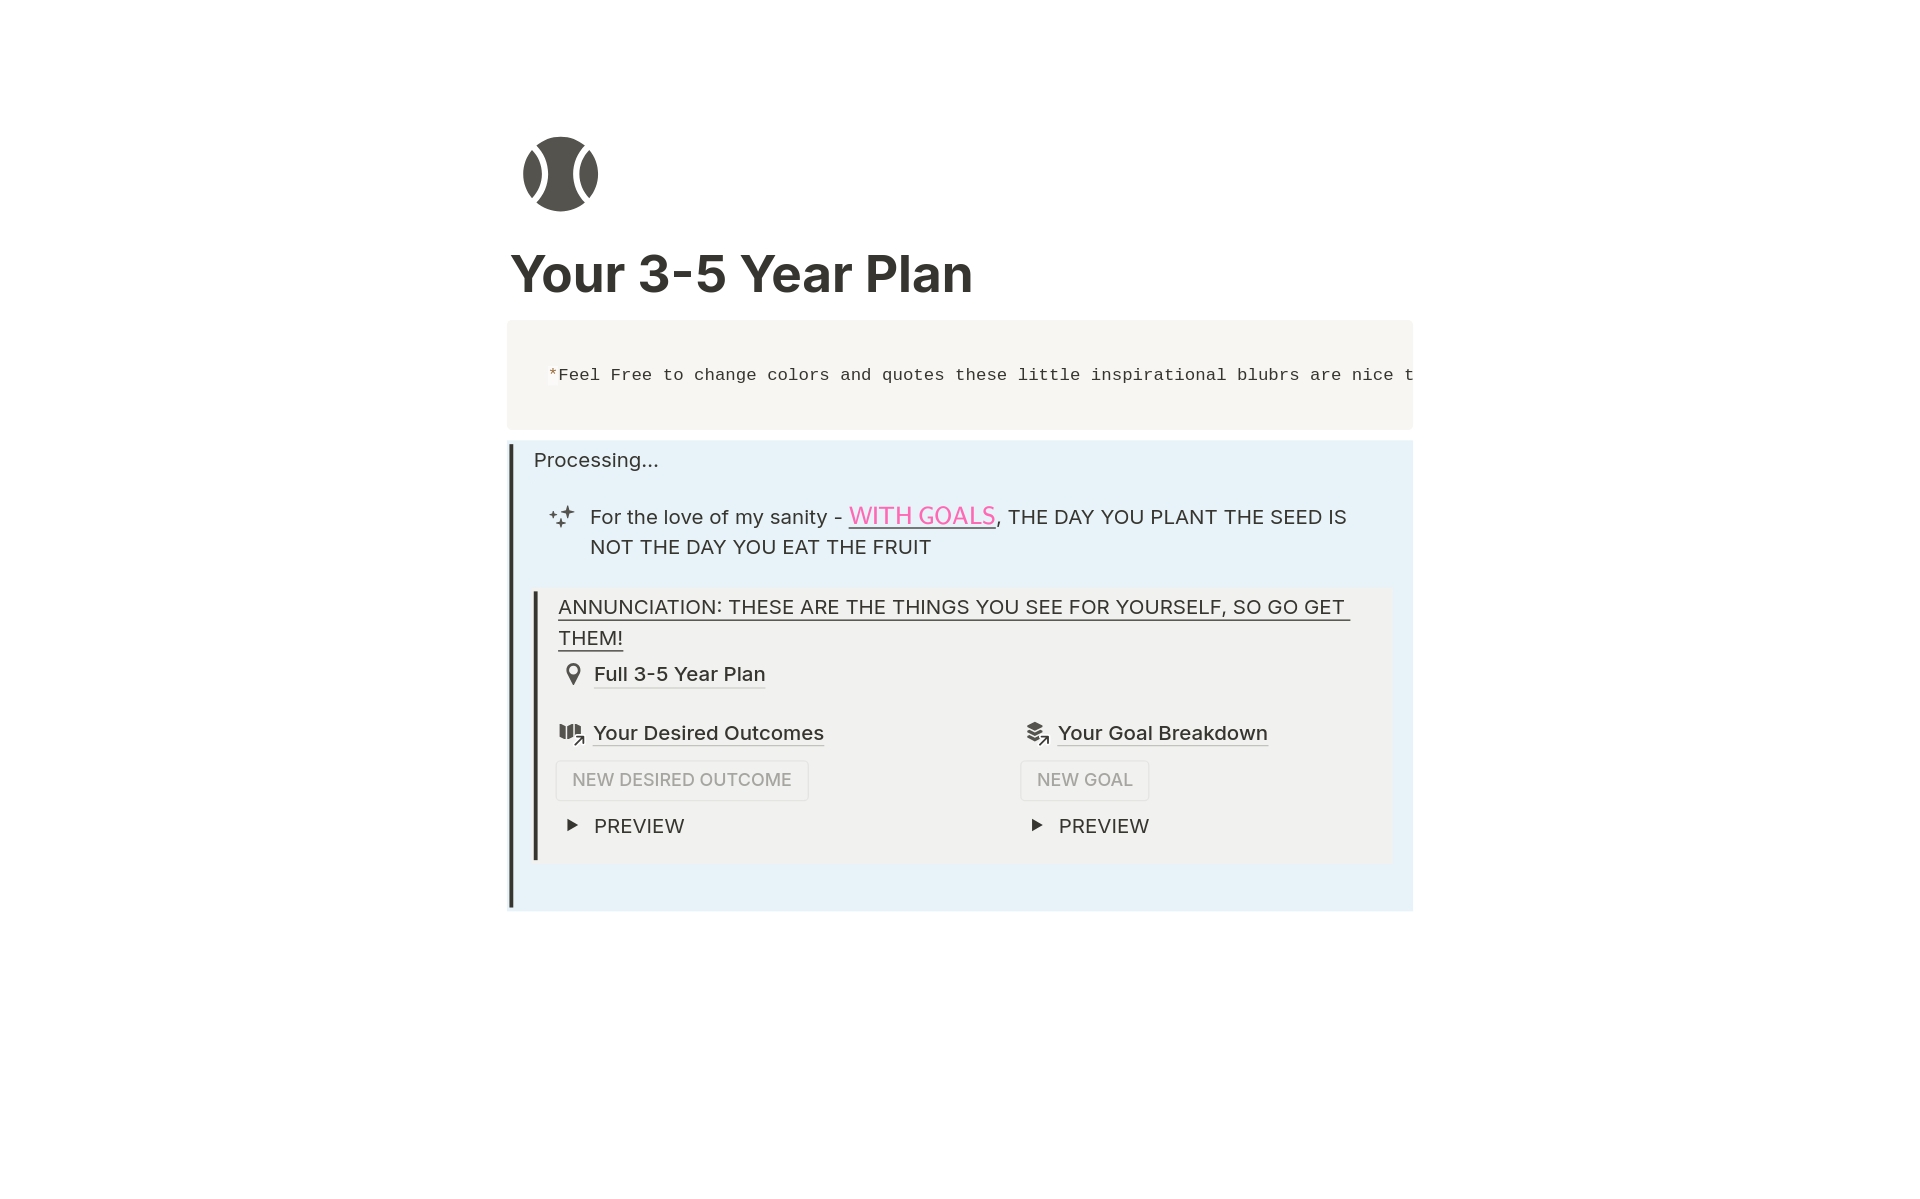 Don't judge a book by its cover! This is my positive non scary spin on goal setting. Craft your dream future with this interactive Notion template designed to guide you through planning the next 3-5 years of your life.